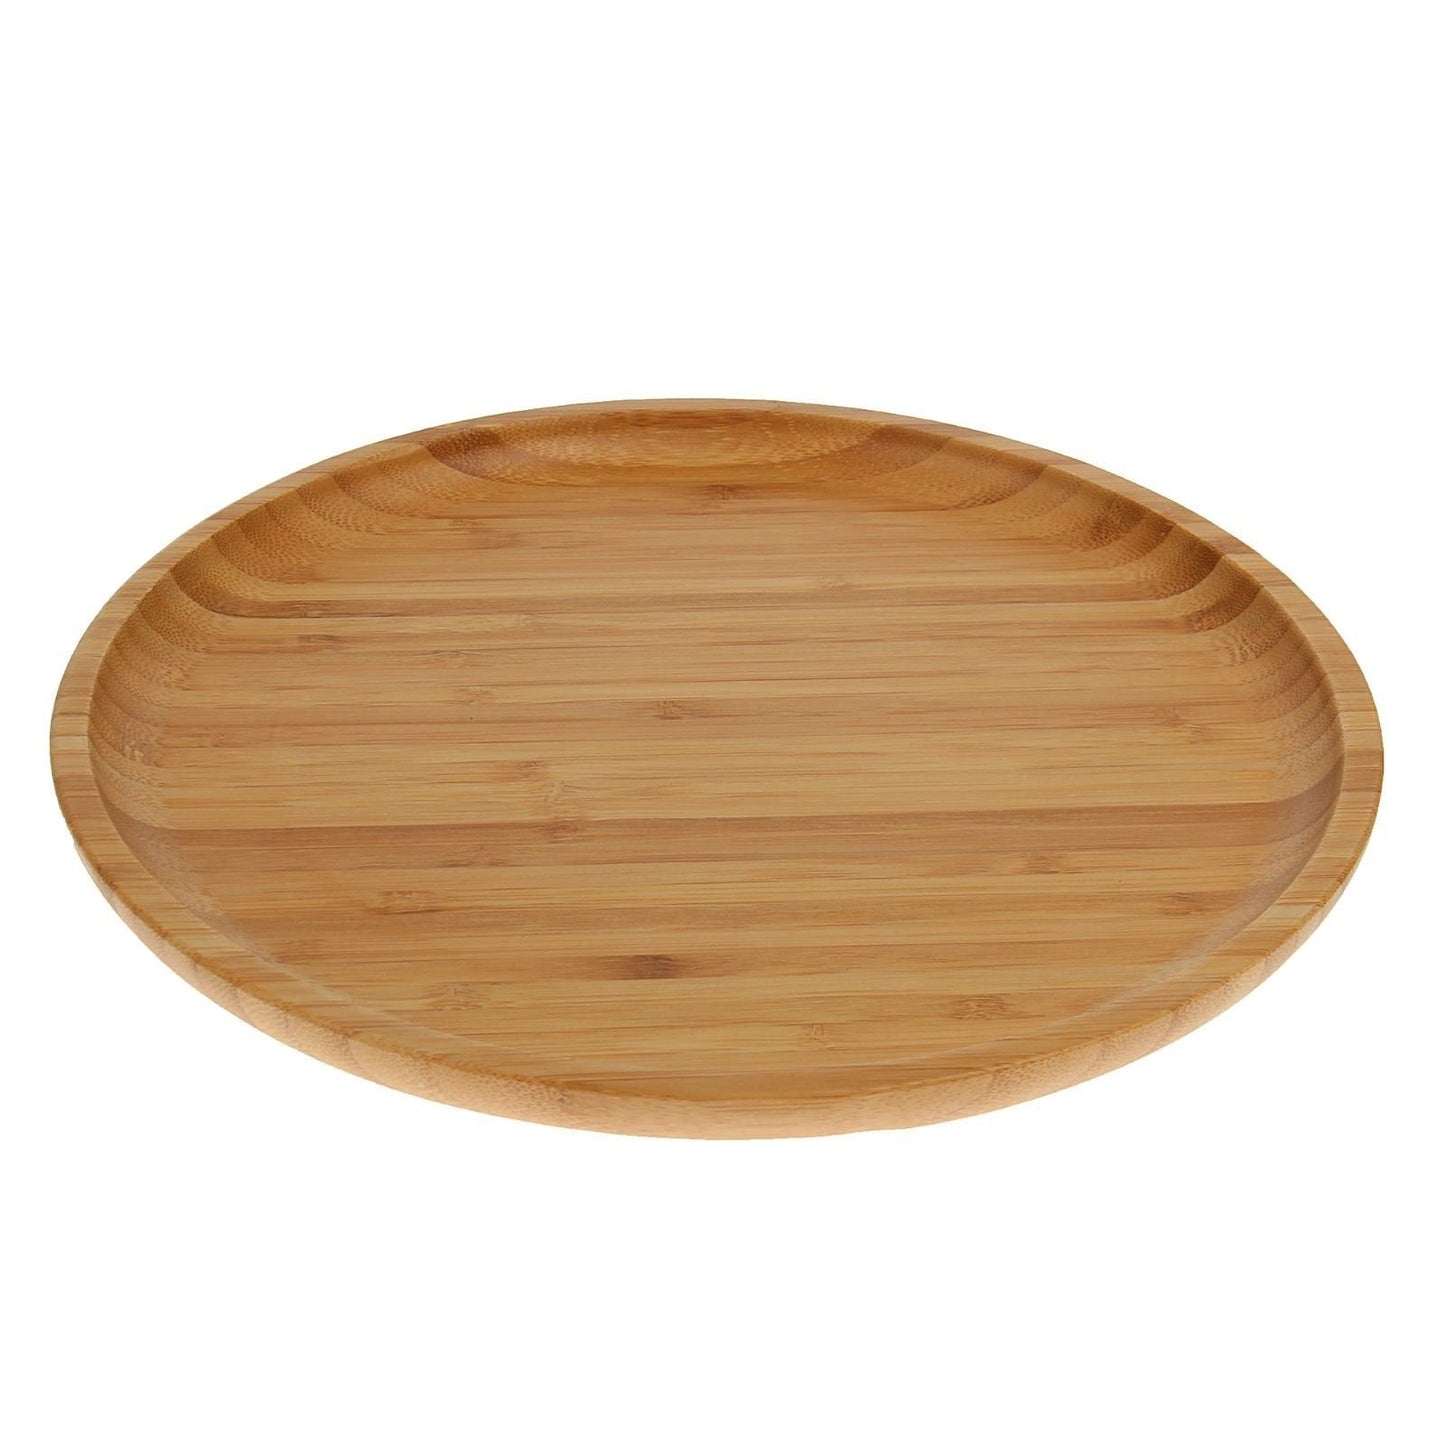 Bamboo Round Plate 11" inch -3